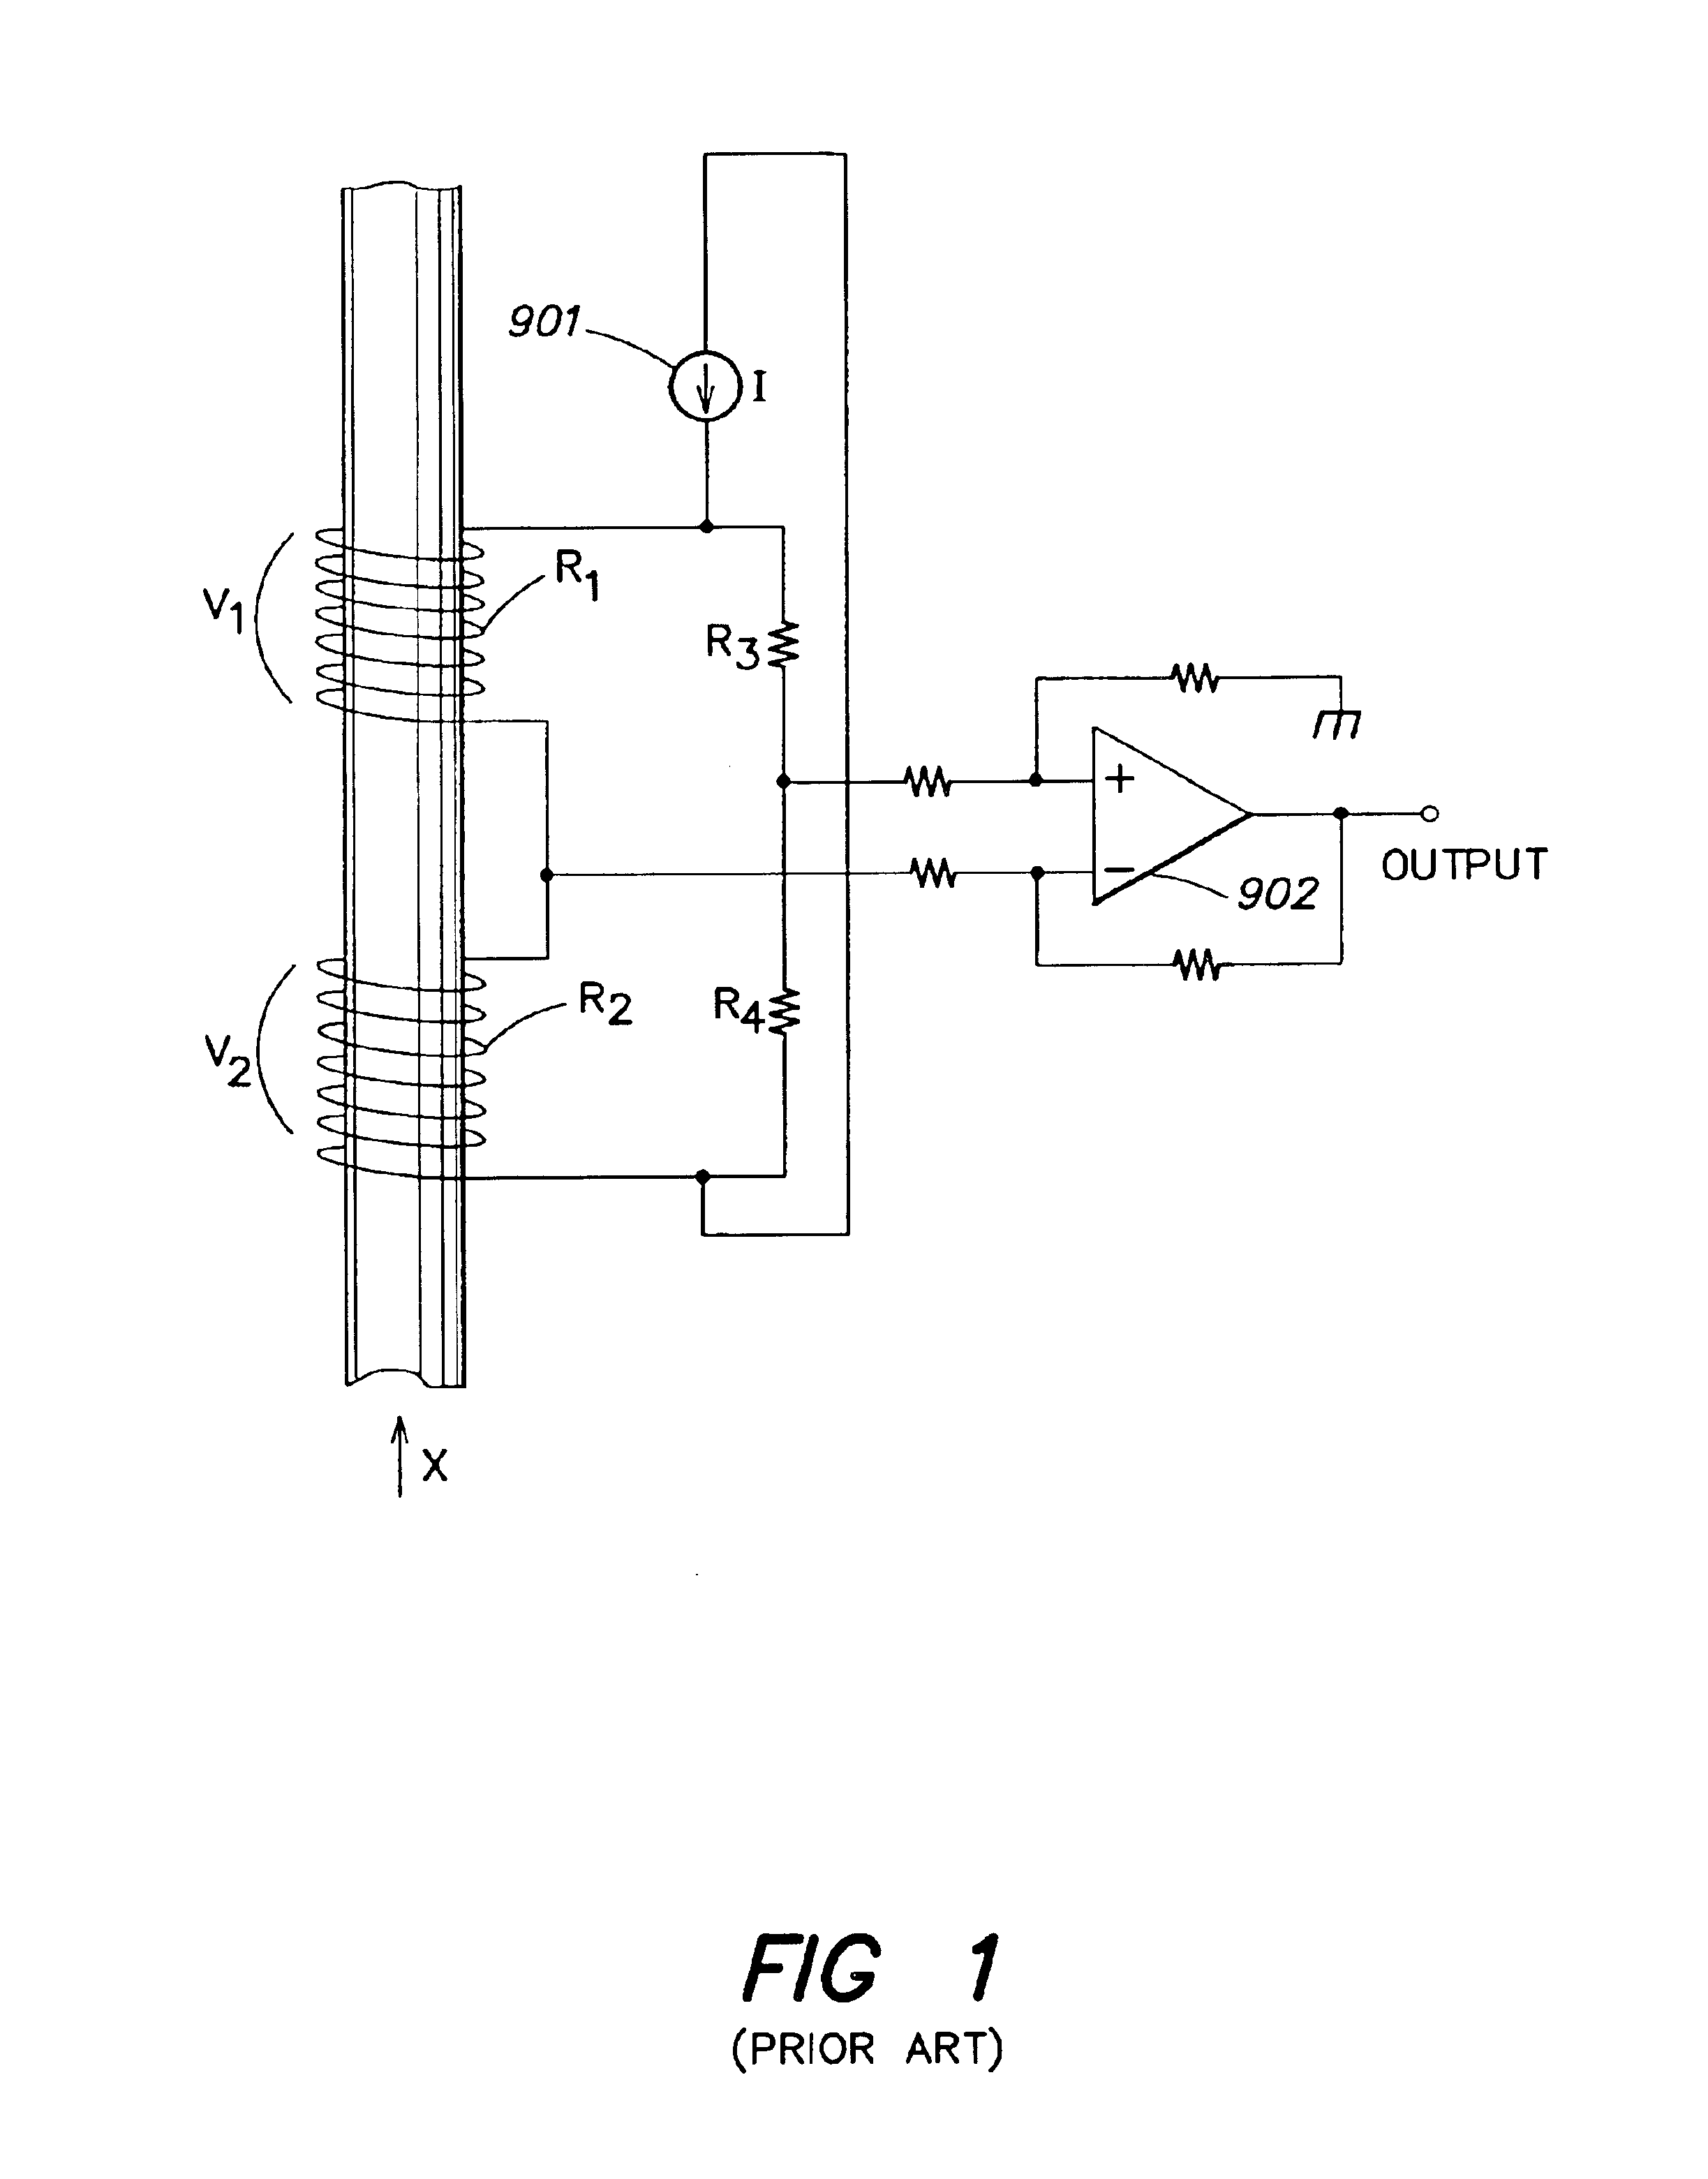 Variable resistance sensor with common reference leg